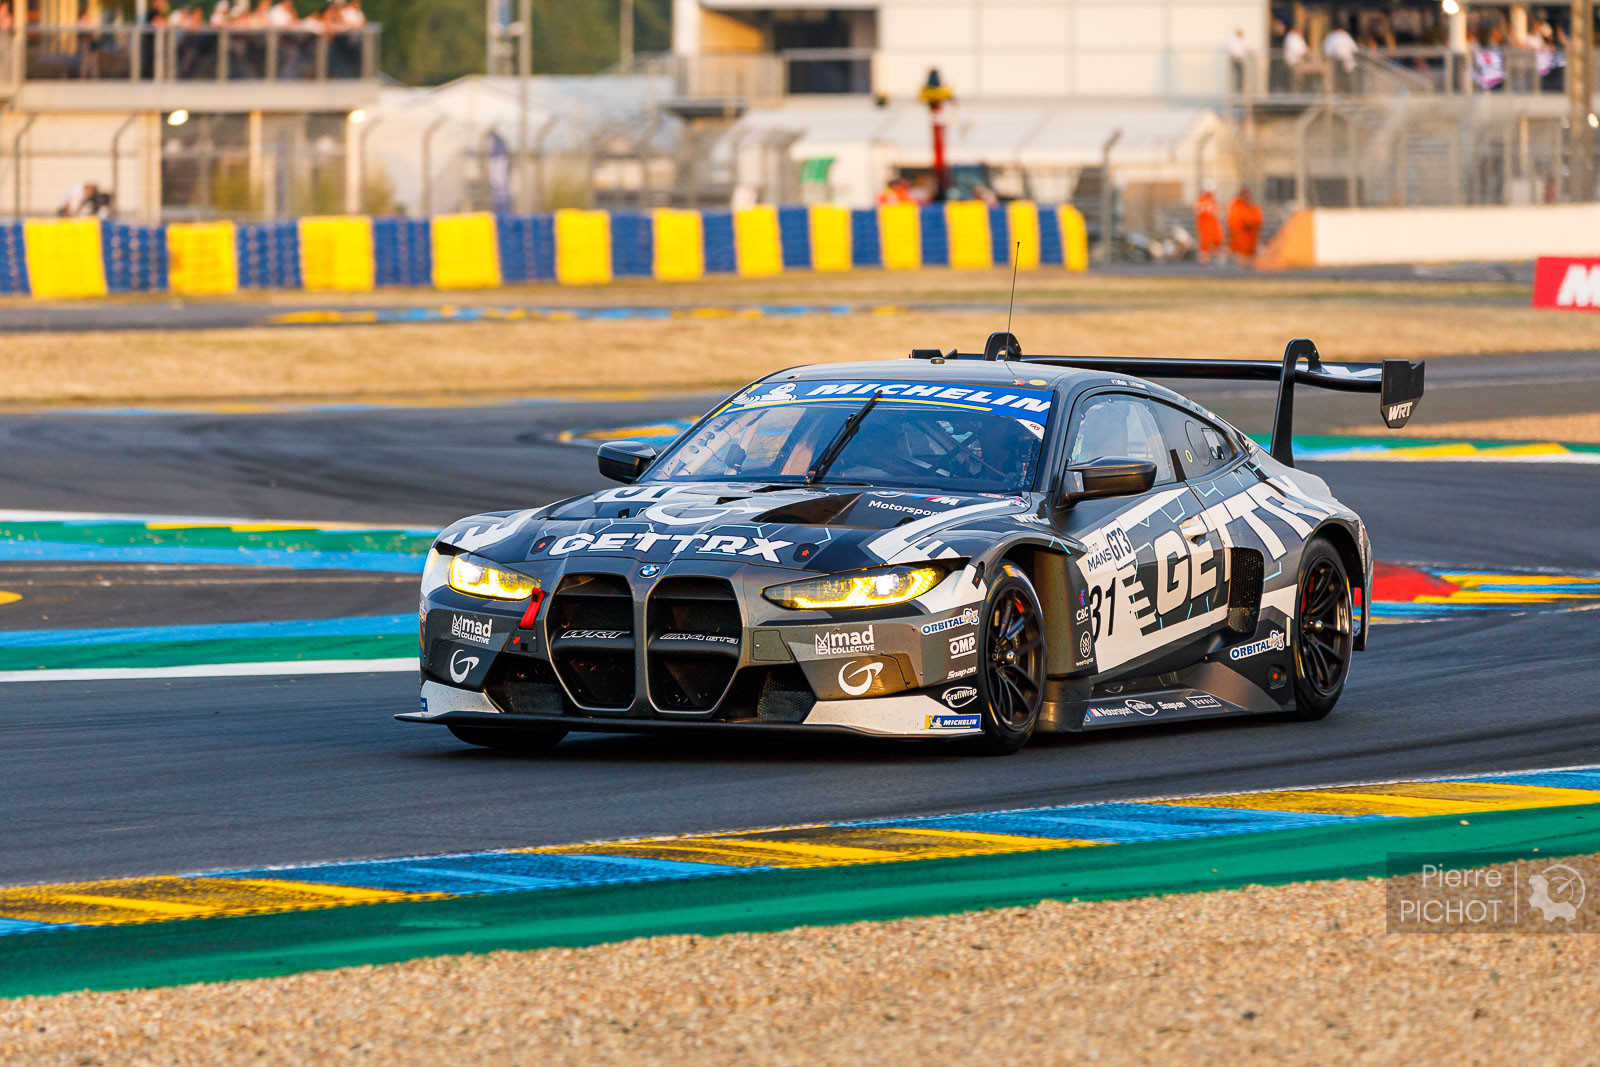 BMW M4 GT3 Max Hesse Road to Le Mans